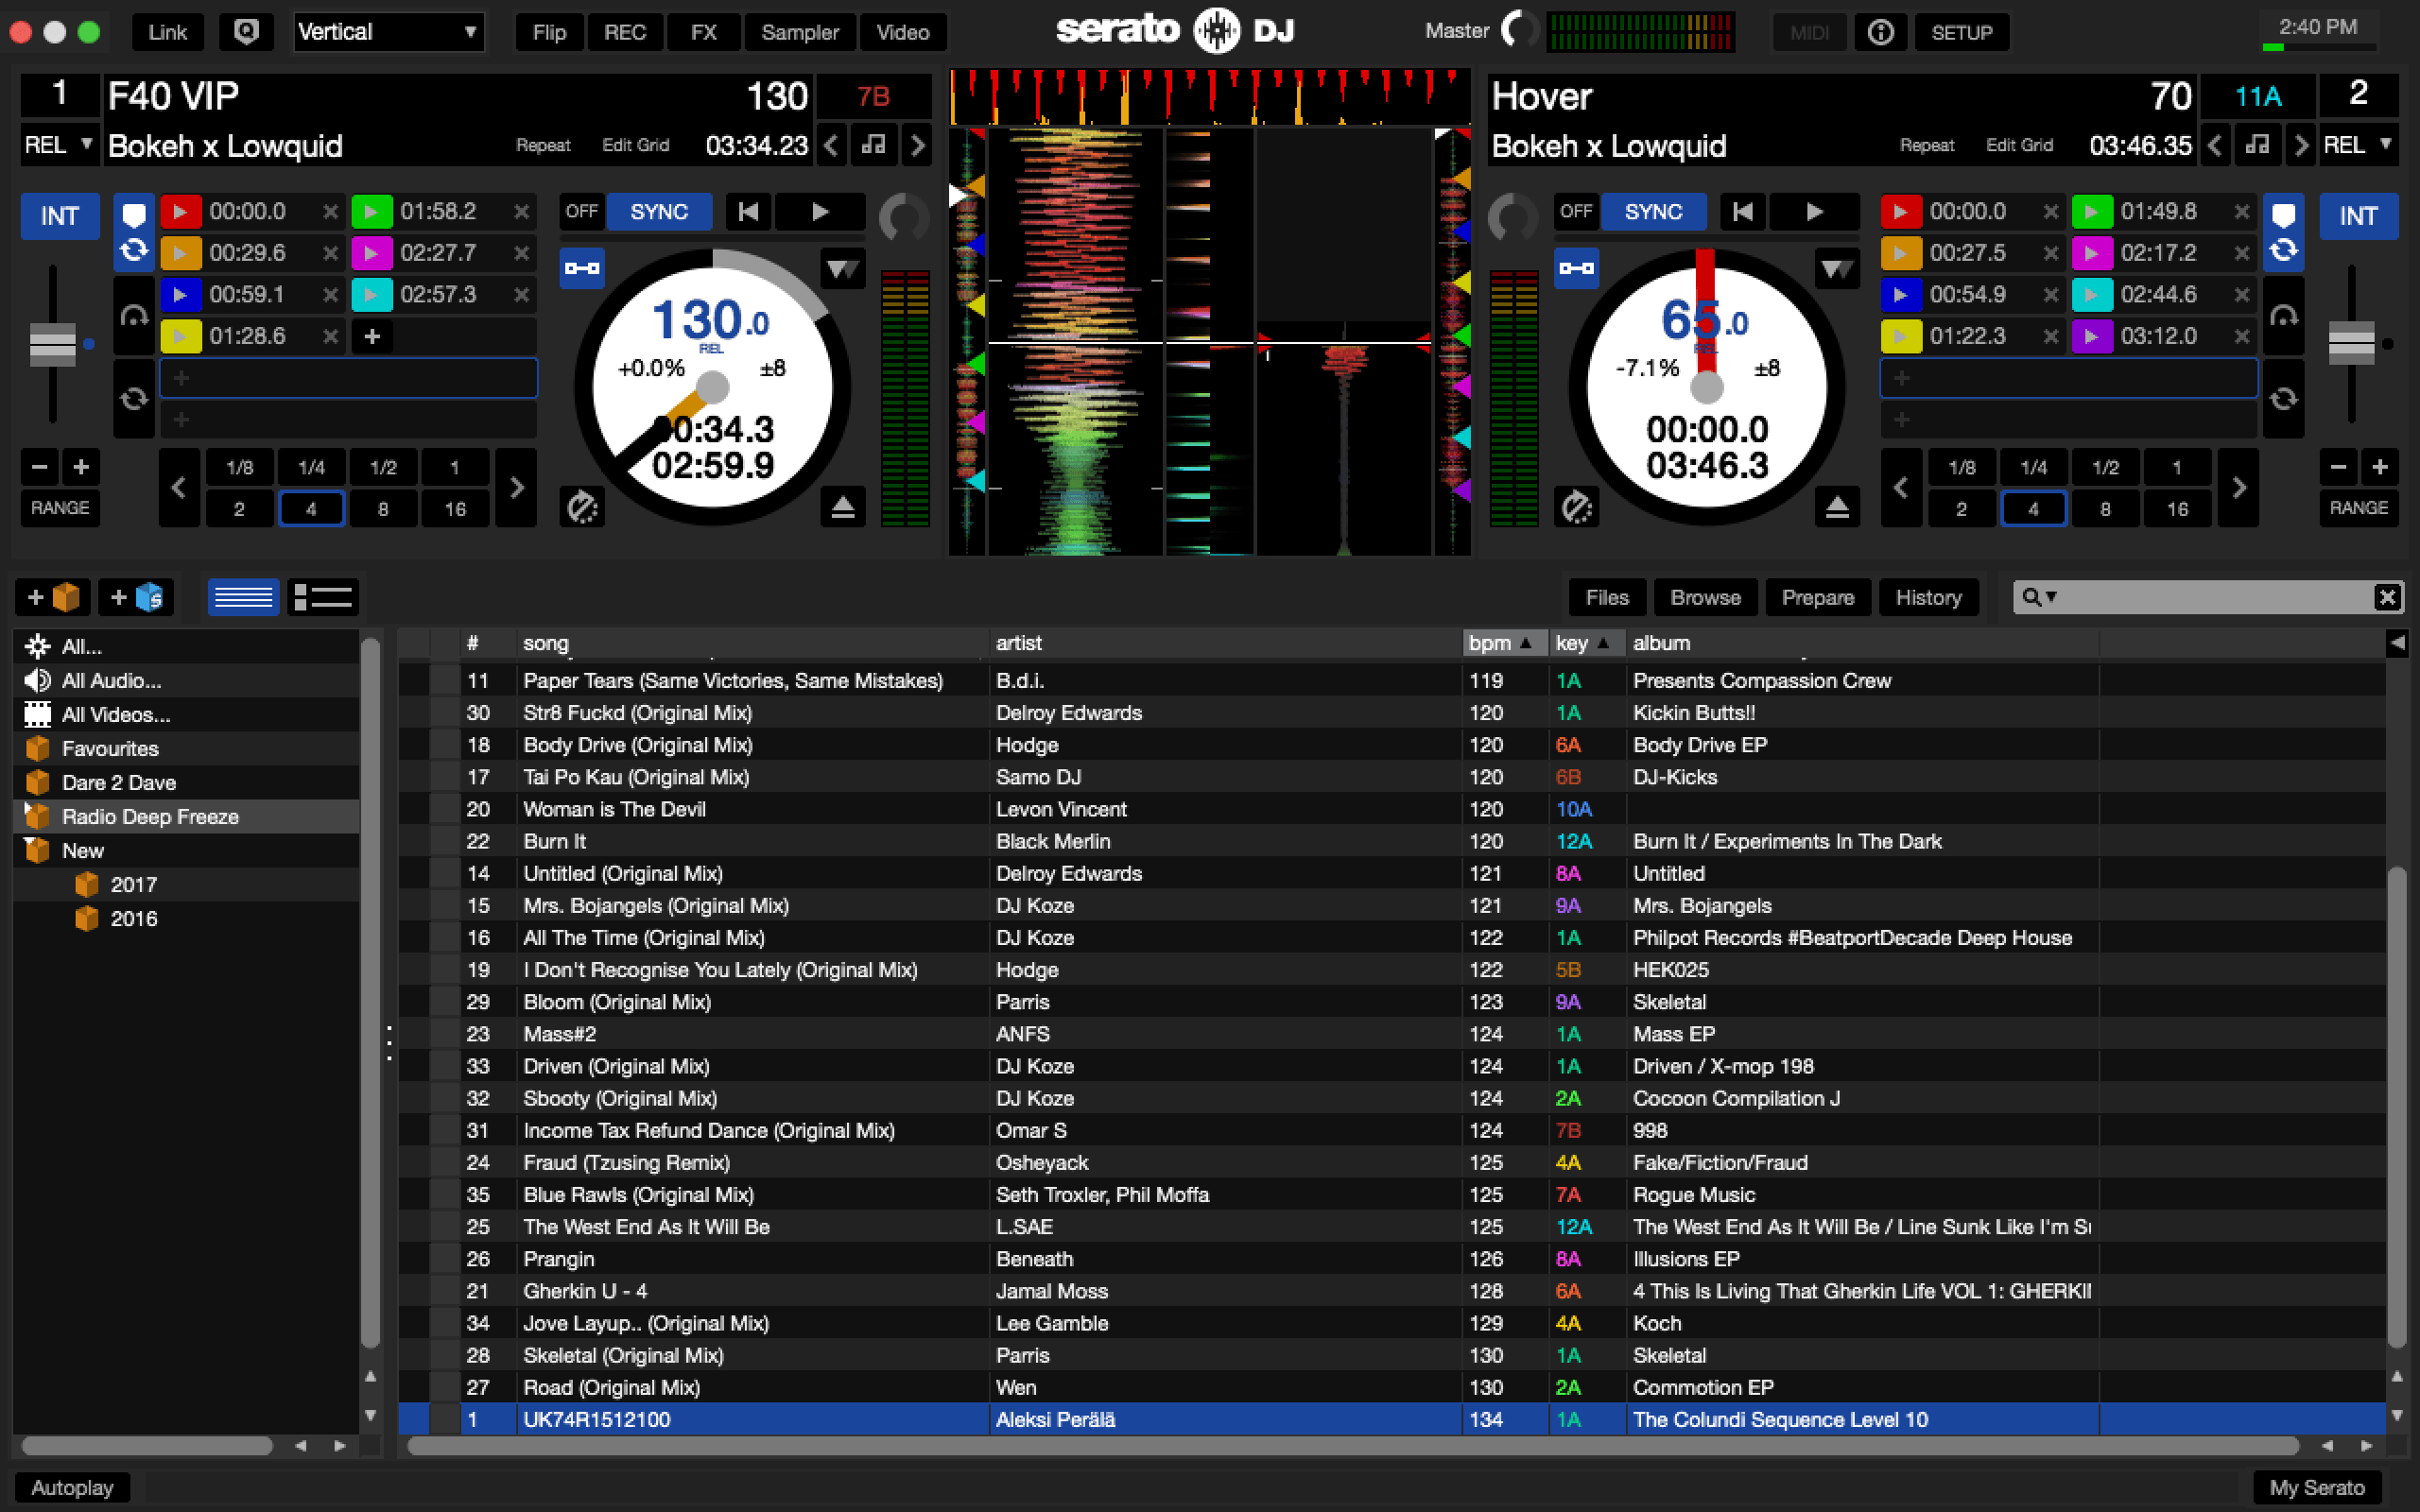 How to change the look of Serato DJ